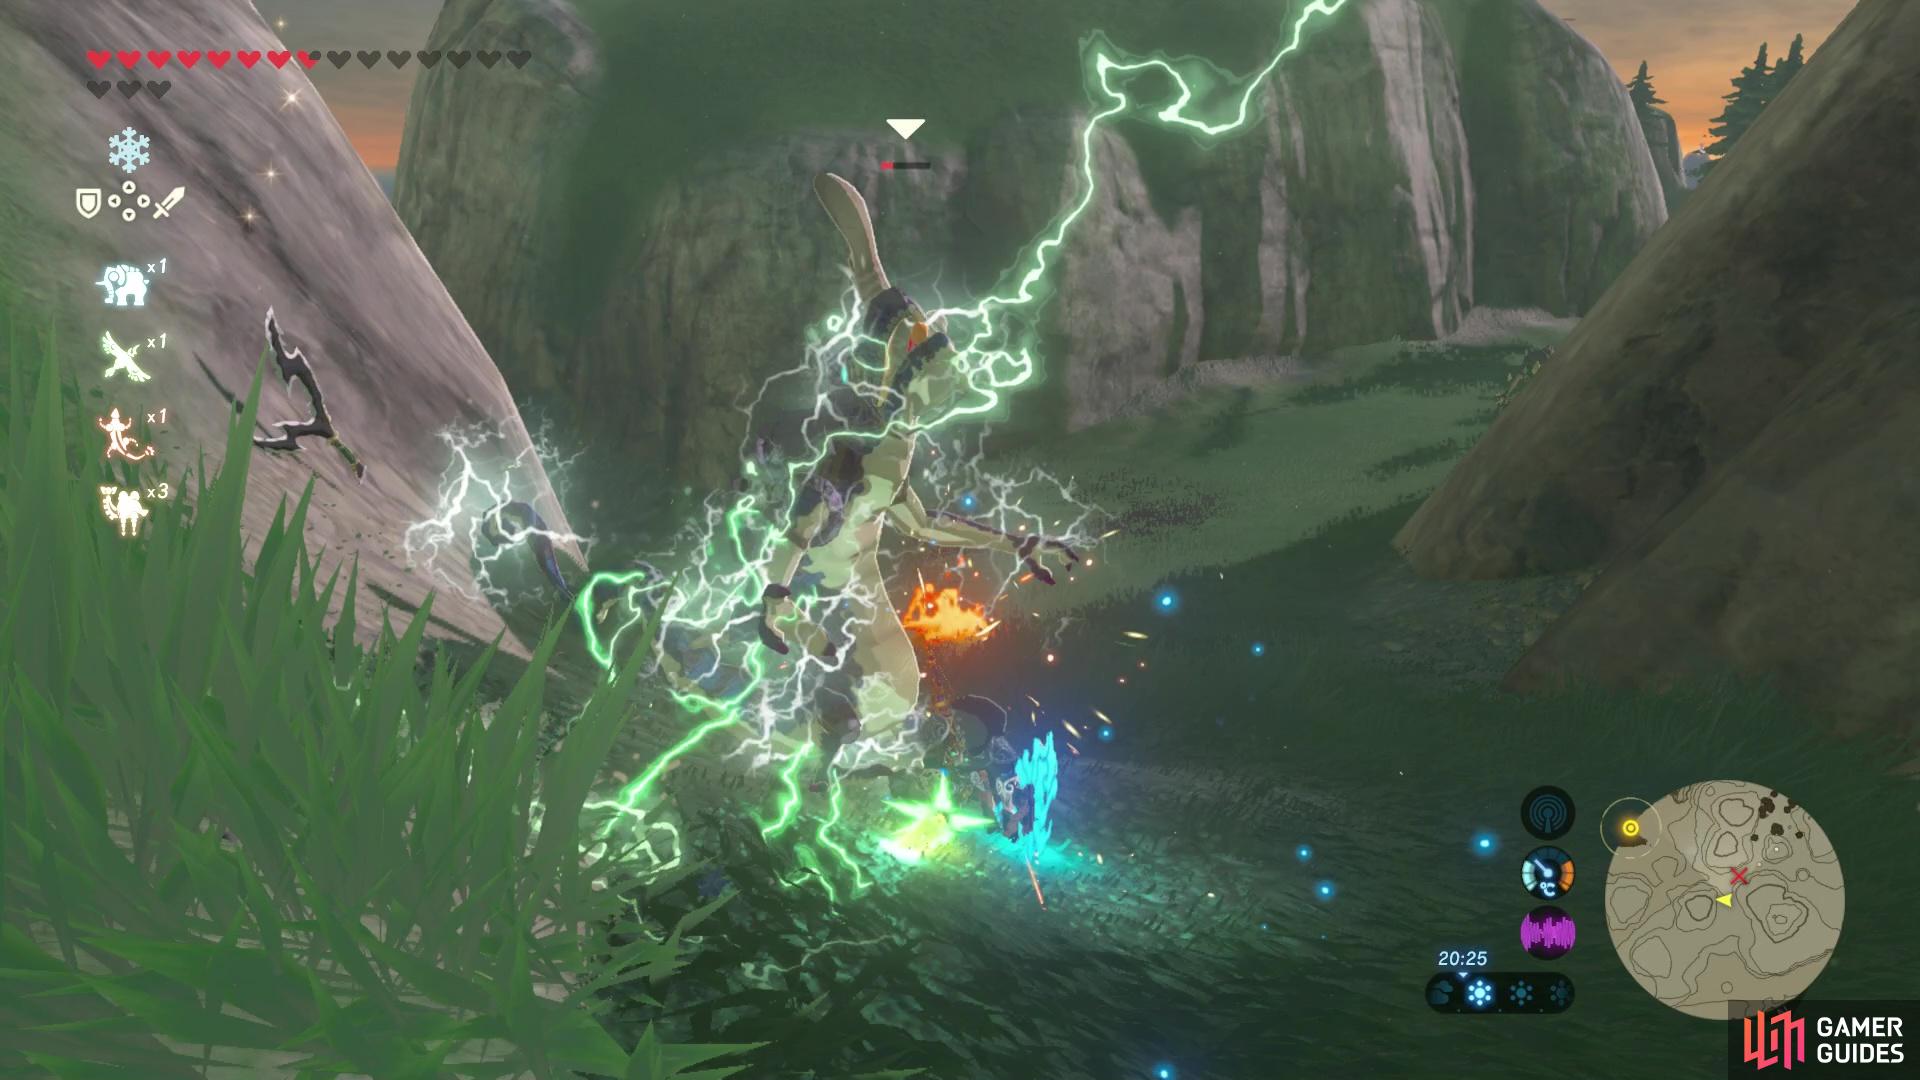 Lightning damage stuns enemies and makes them drop their metal weapons!